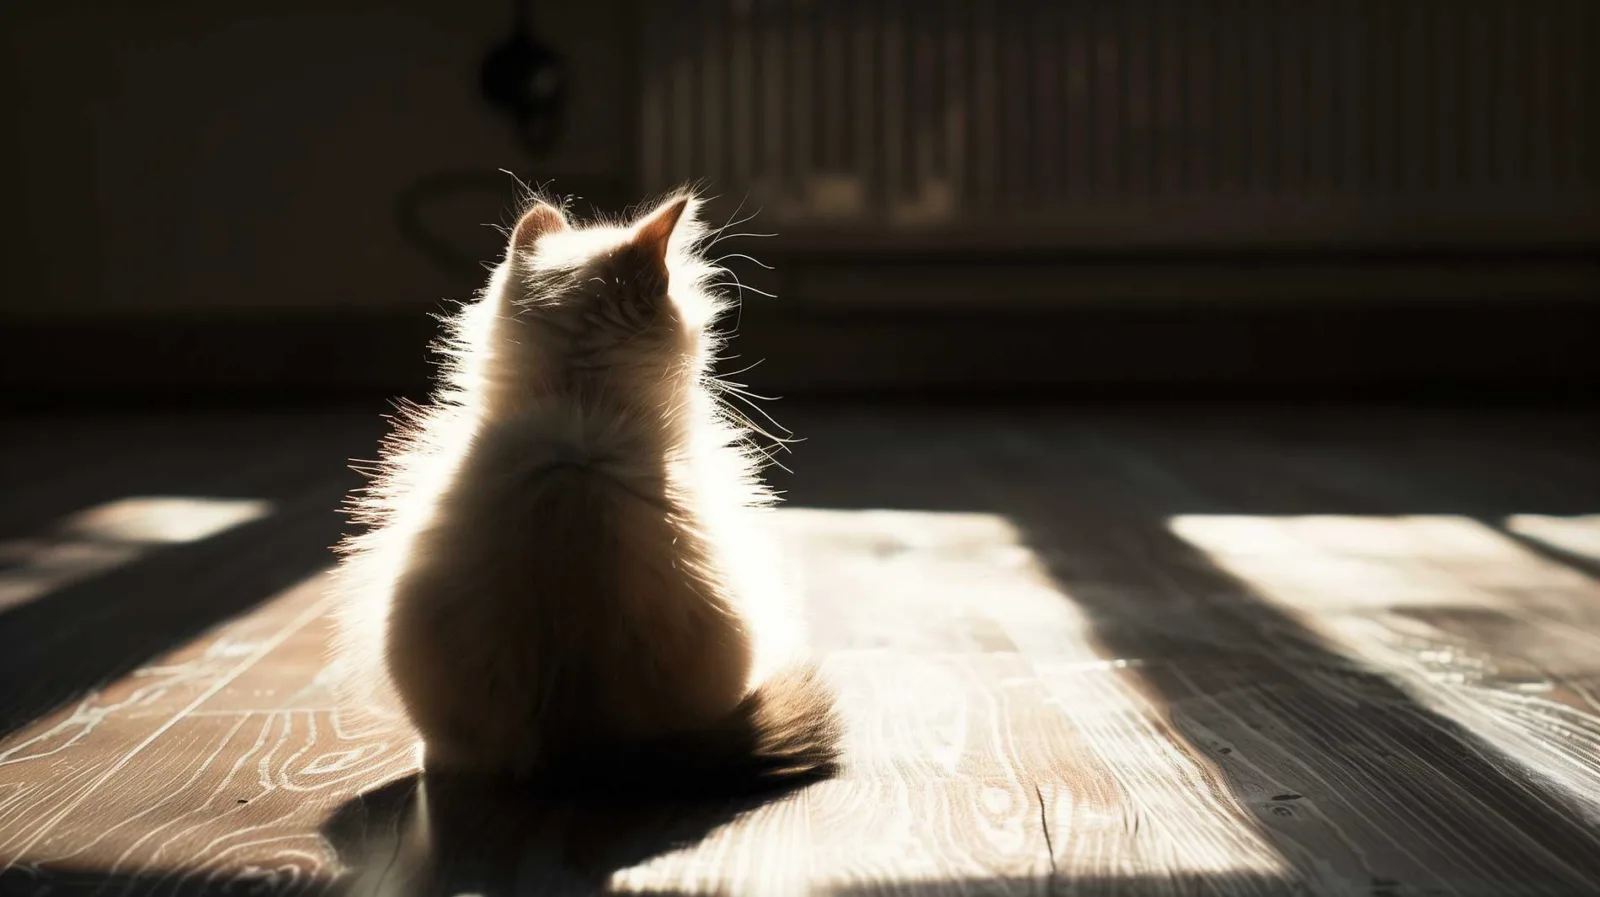 A silhouetted image of a fluffy kitten sitting on a hardwood floor, backlit by bright sunlight coming through a window. The light outlines the cat's fur, highlighting its fluff and whiskers. The cat is facing away from the viewer, looking towards the window, casting a long shadow on the wooden floor that reveals textured wood grain.